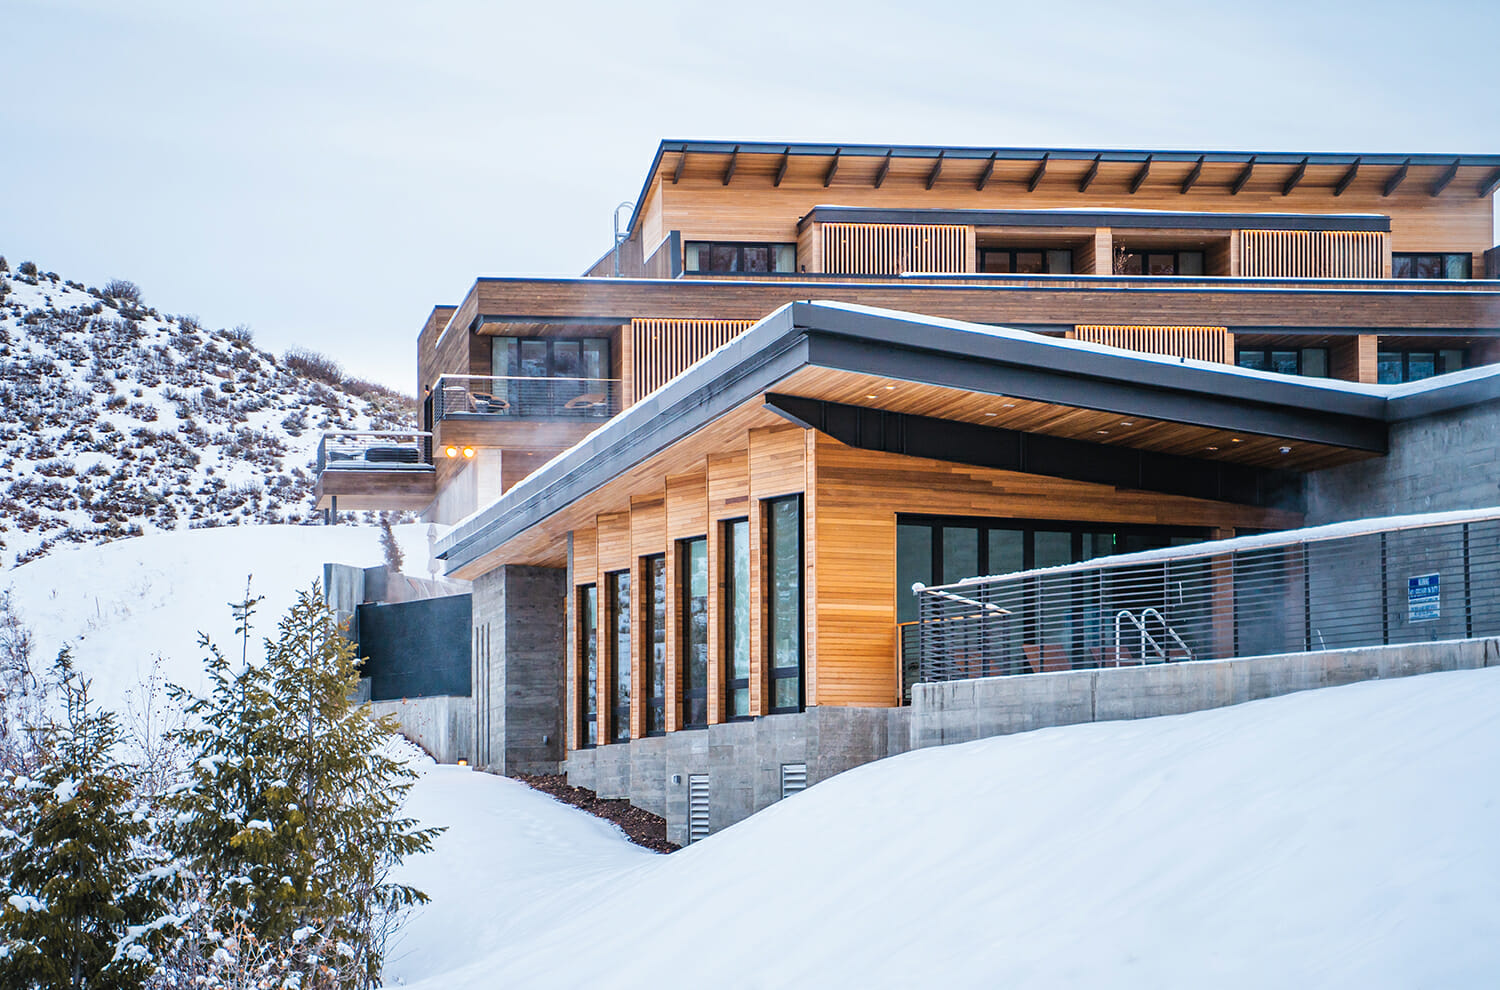 Edge Spa Exterior in Winter cropped